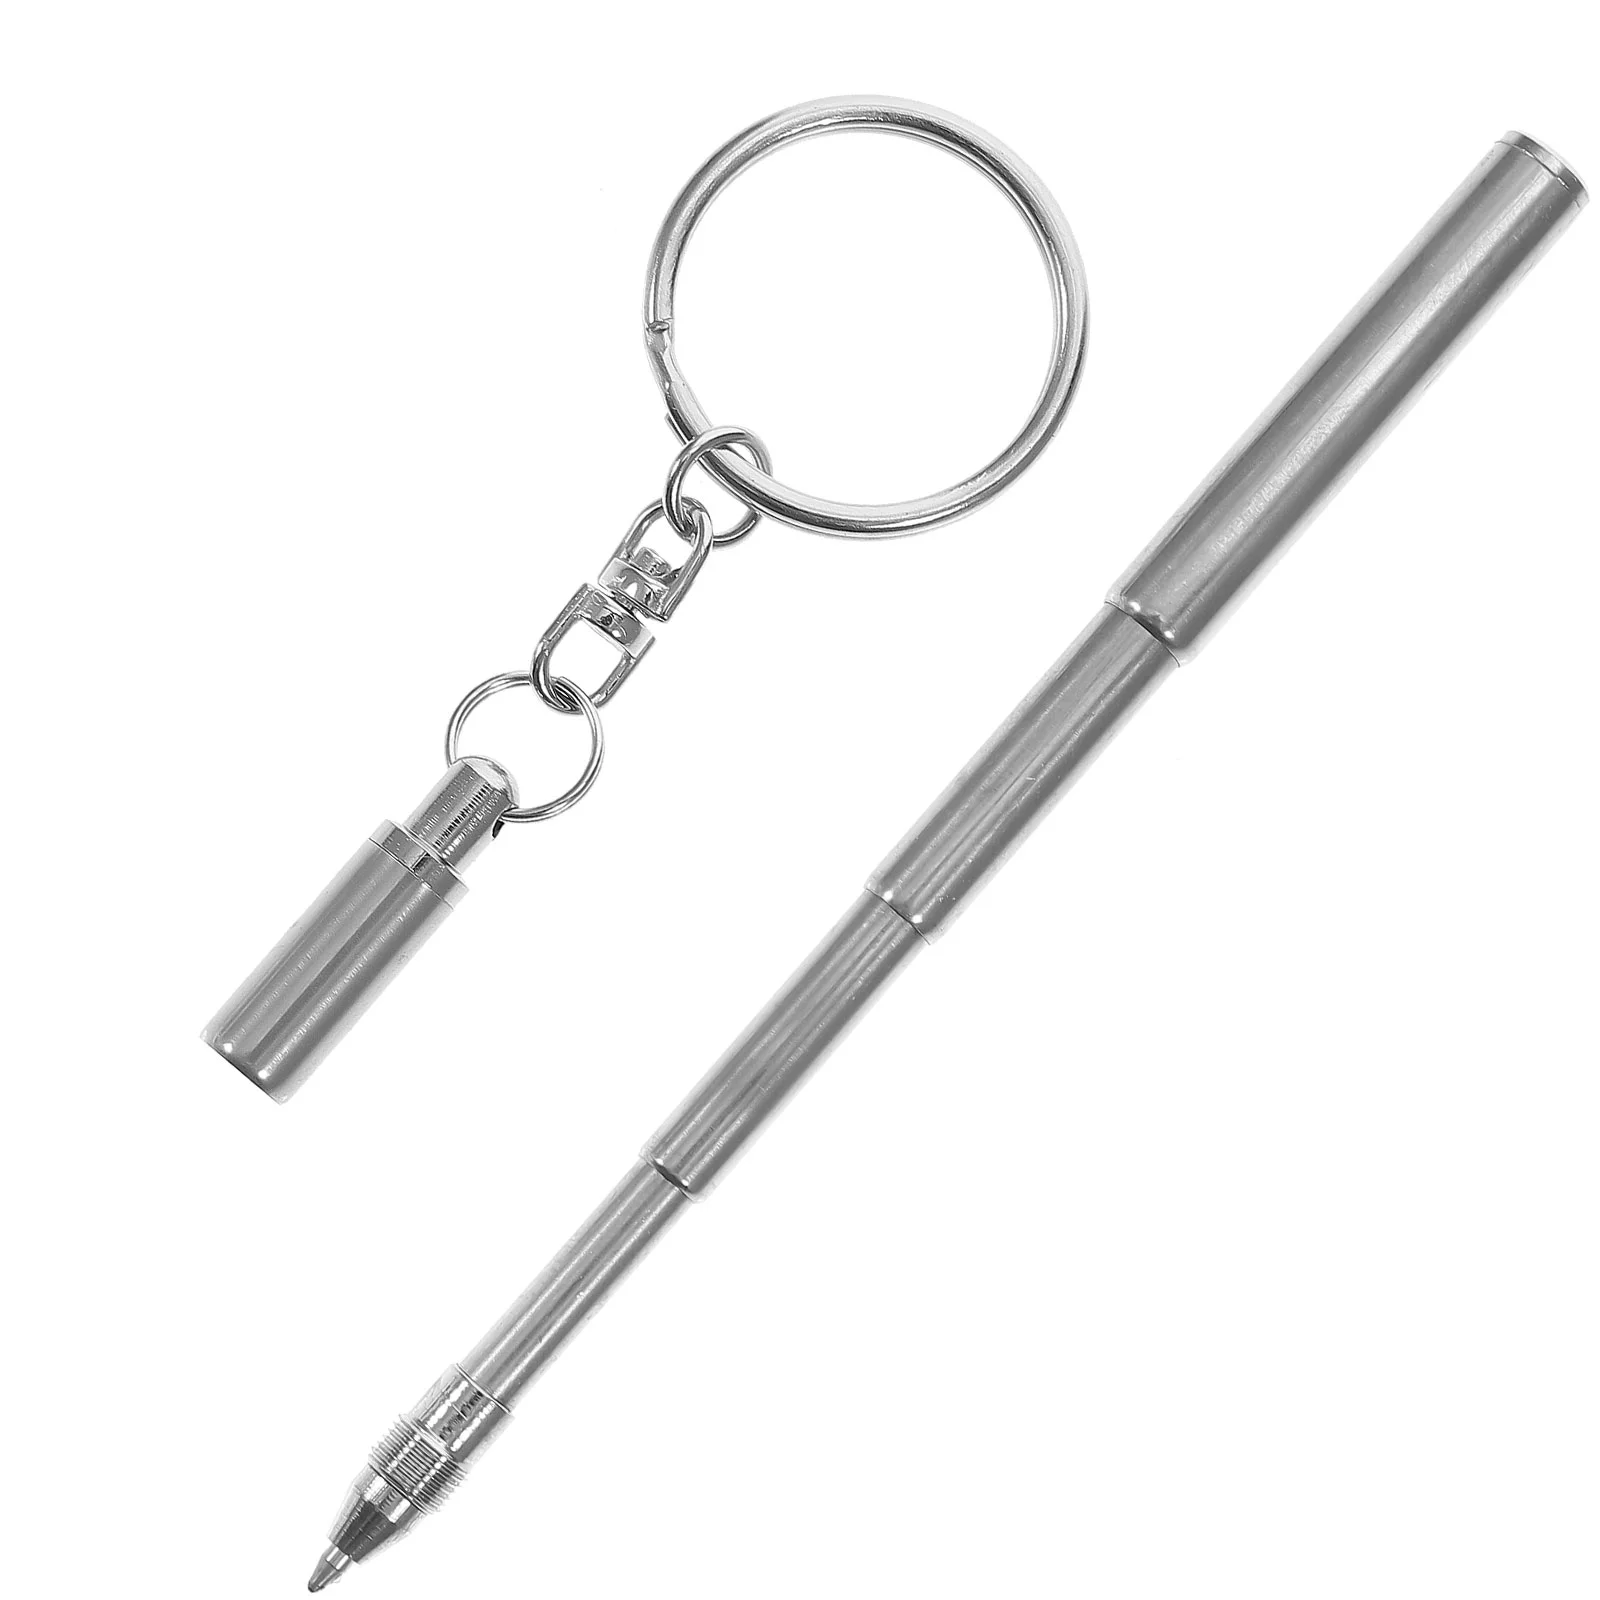 Retractable Pen Shape Keychain Mini Metal Key Ring Portable Stainless Steel Telescopic The Tools Keychain Tools